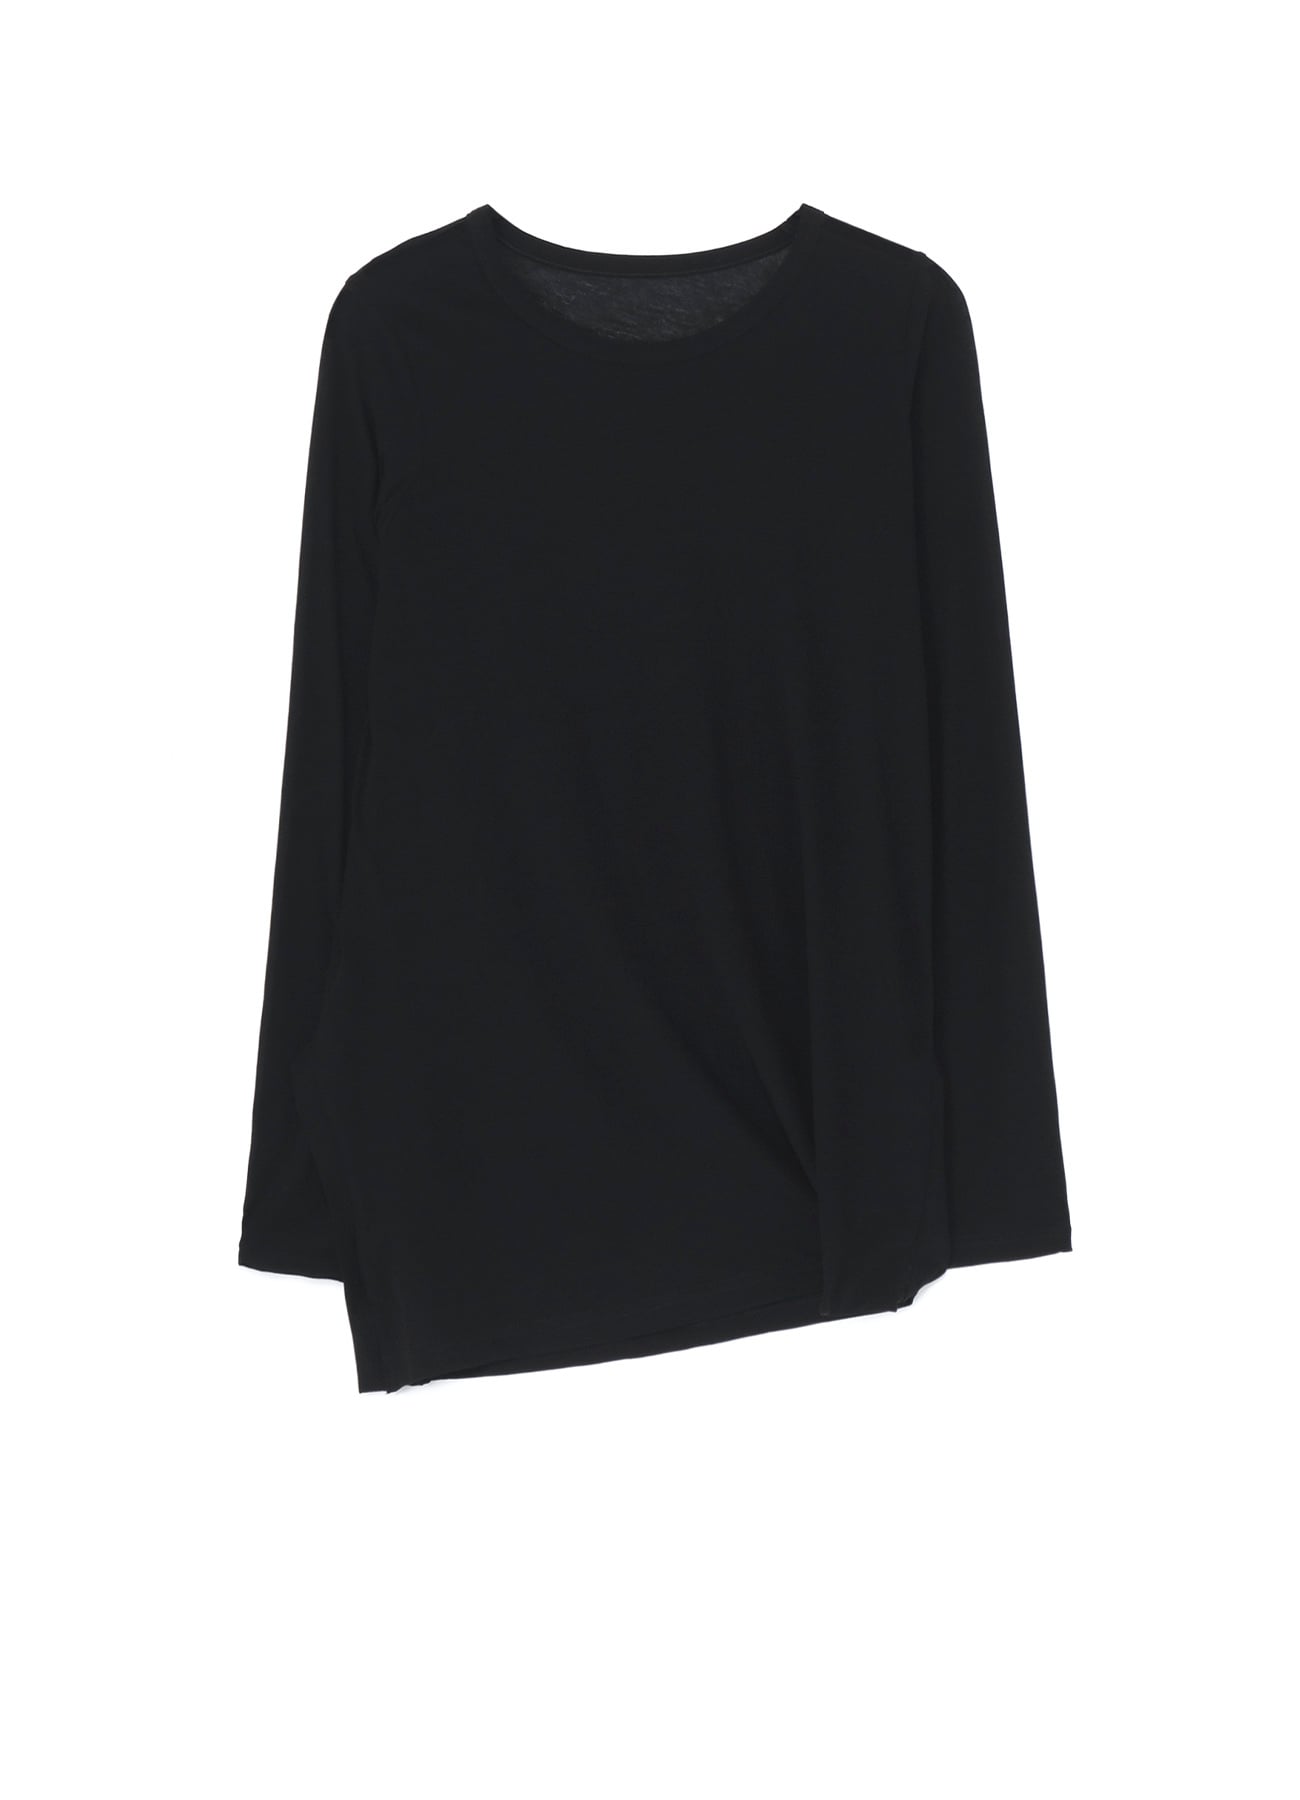 HIGH TWISTED JERSEY SIDE DRAPED LONG SLV TOP